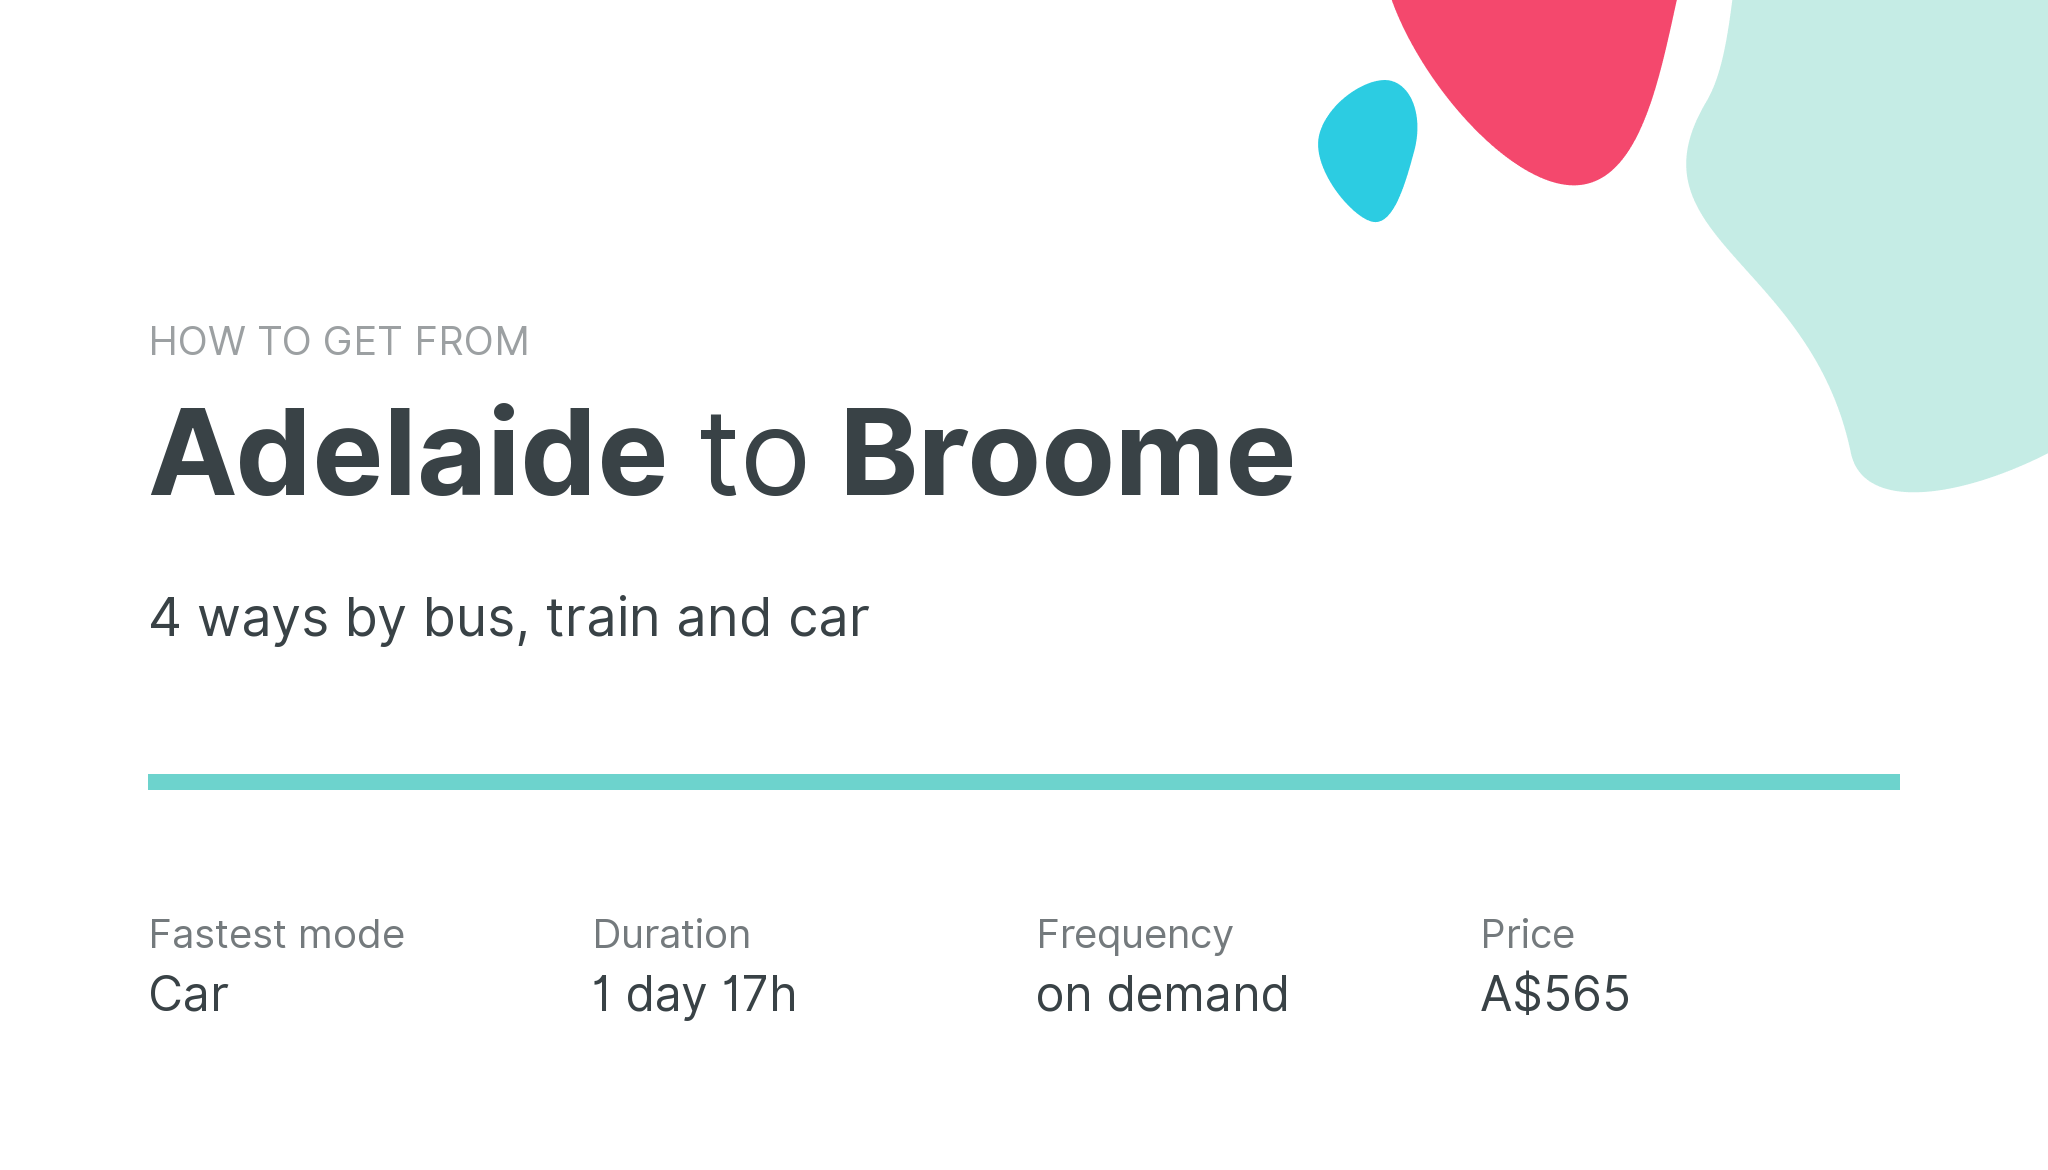 How do I get from Adelaide to Broome